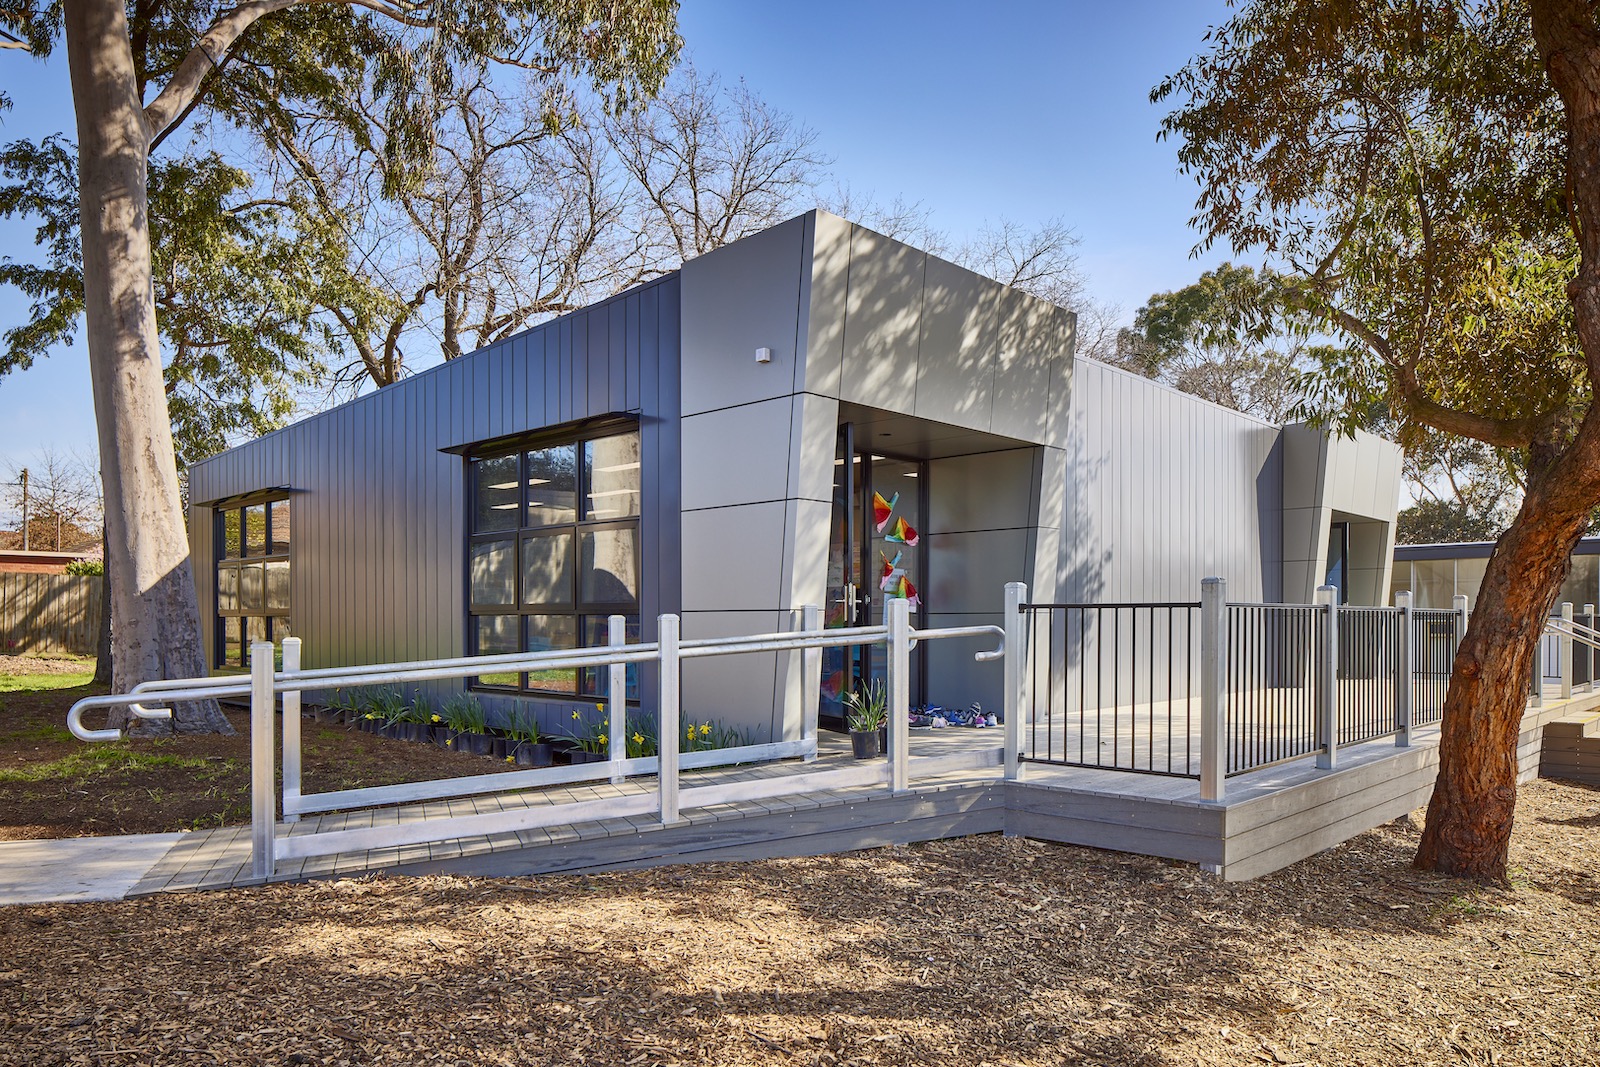 Two portable classrooms